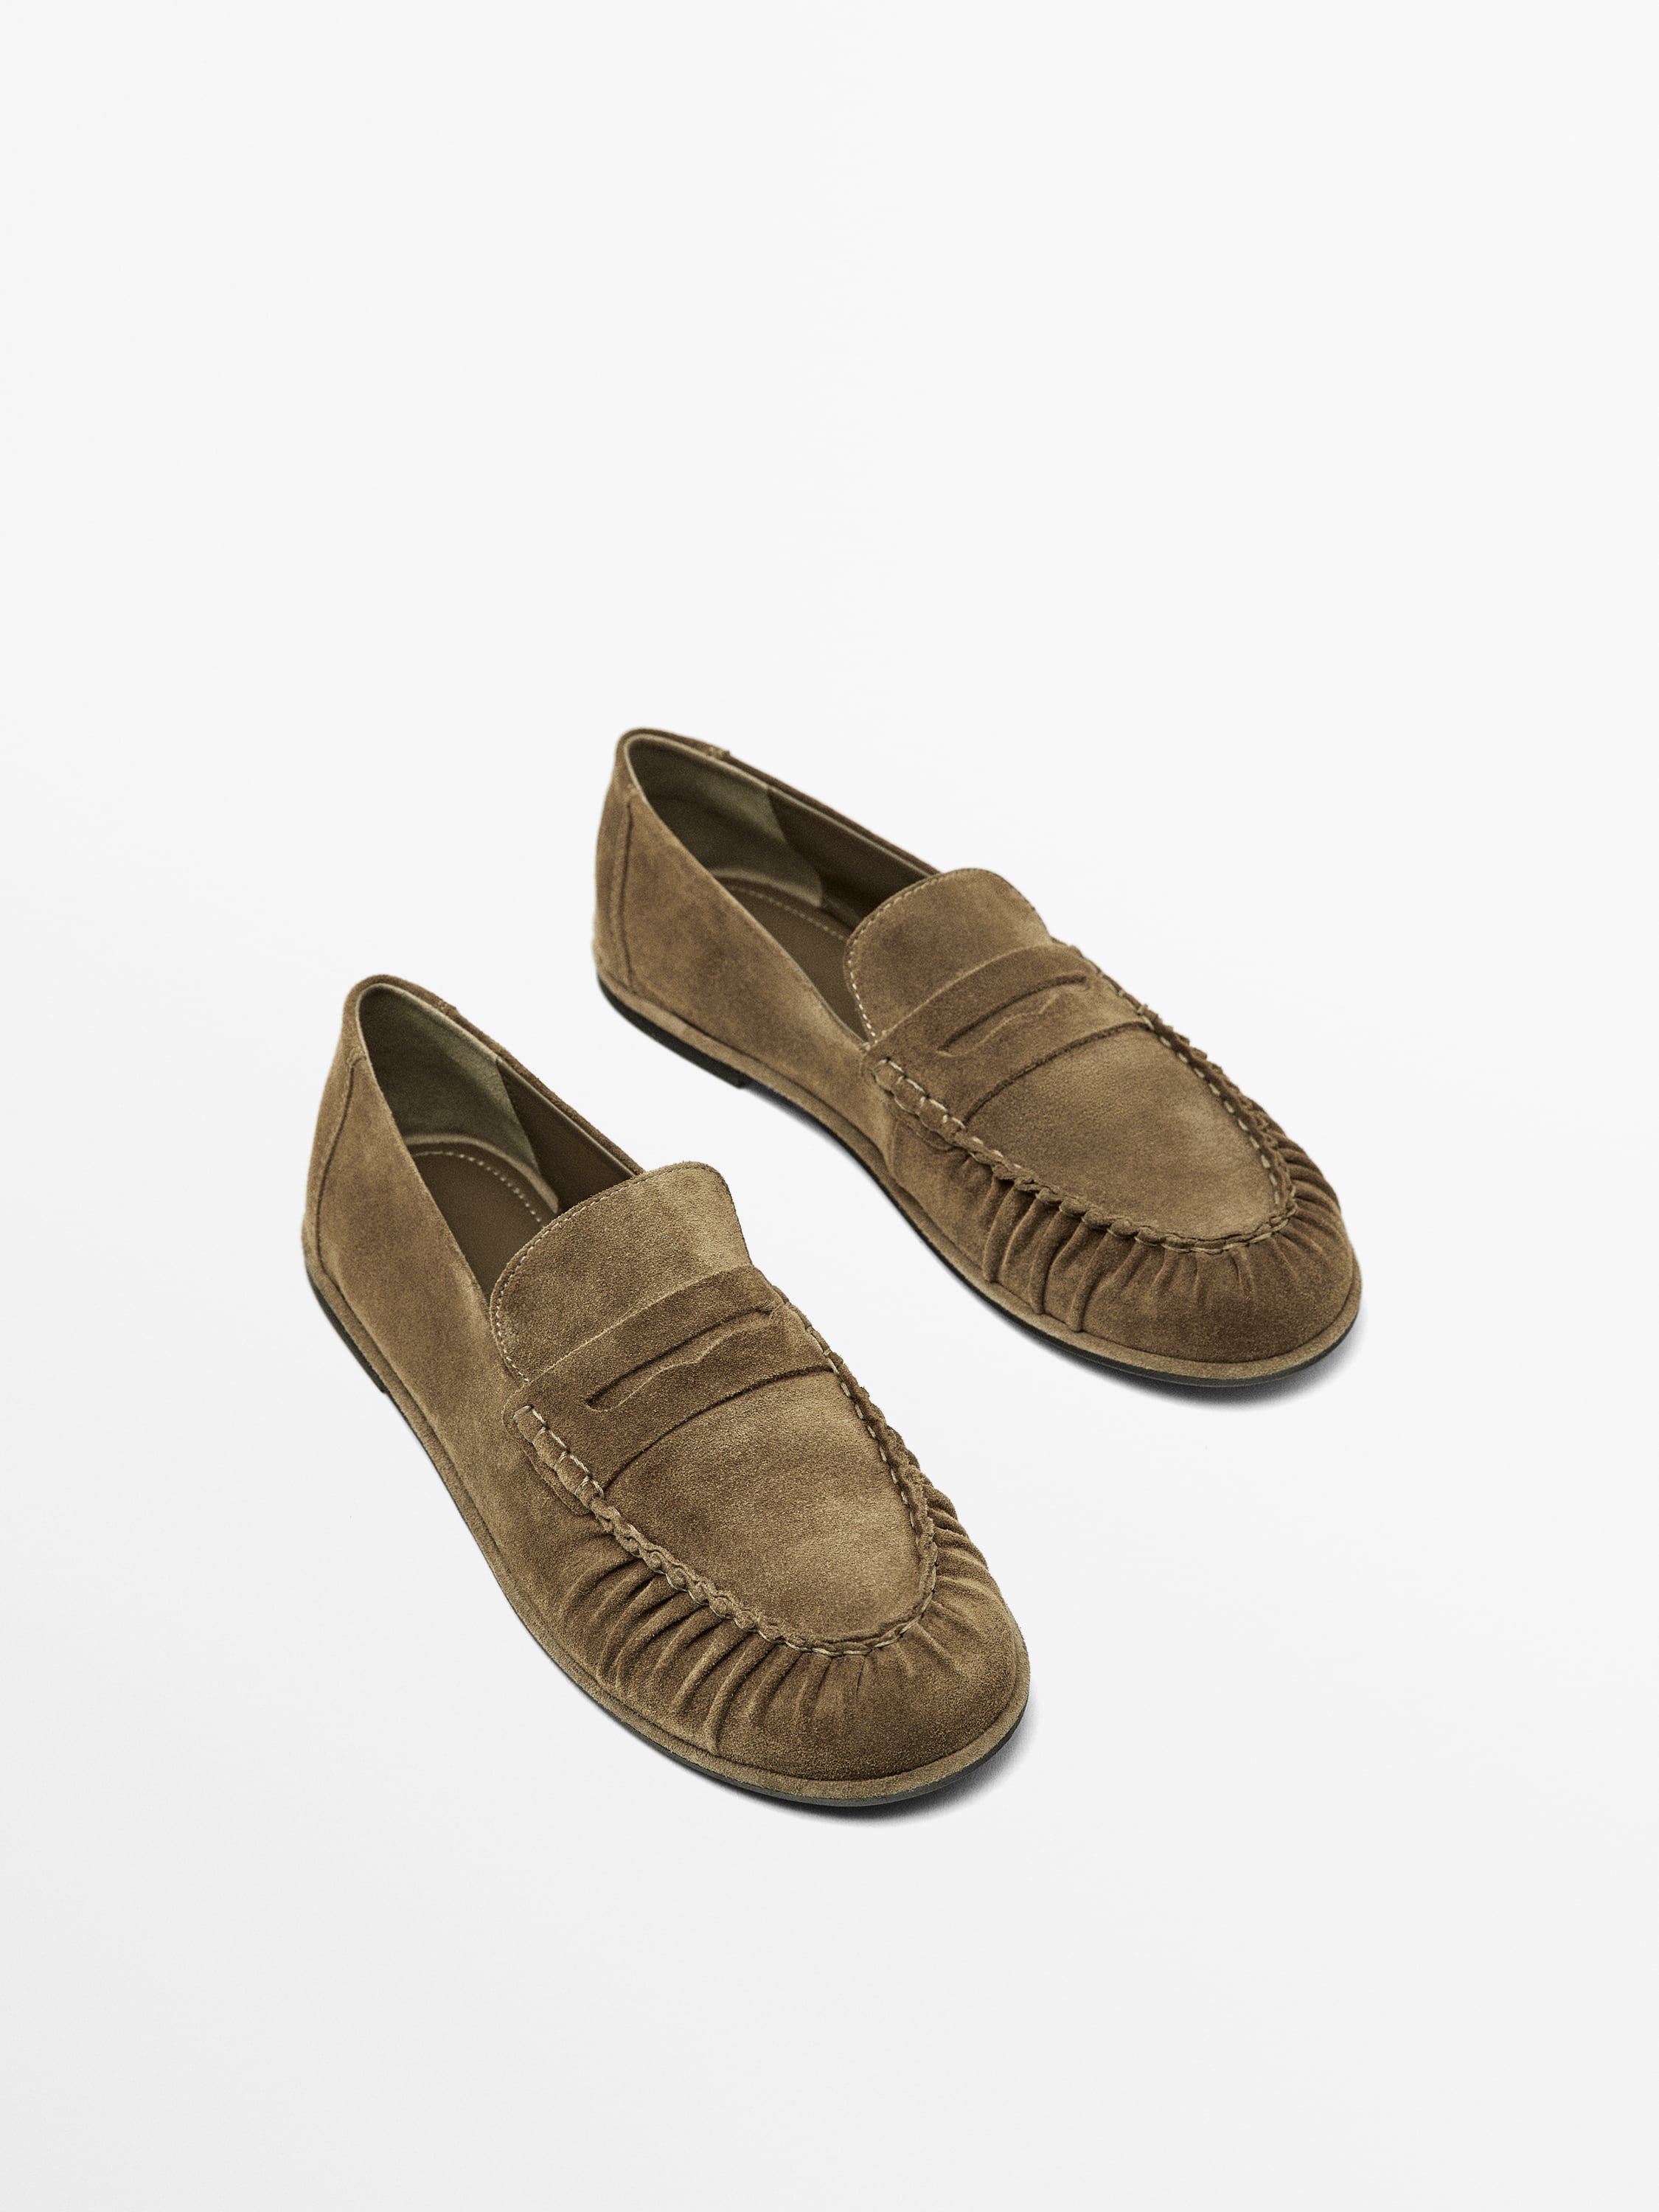 Gathered split leather loafers